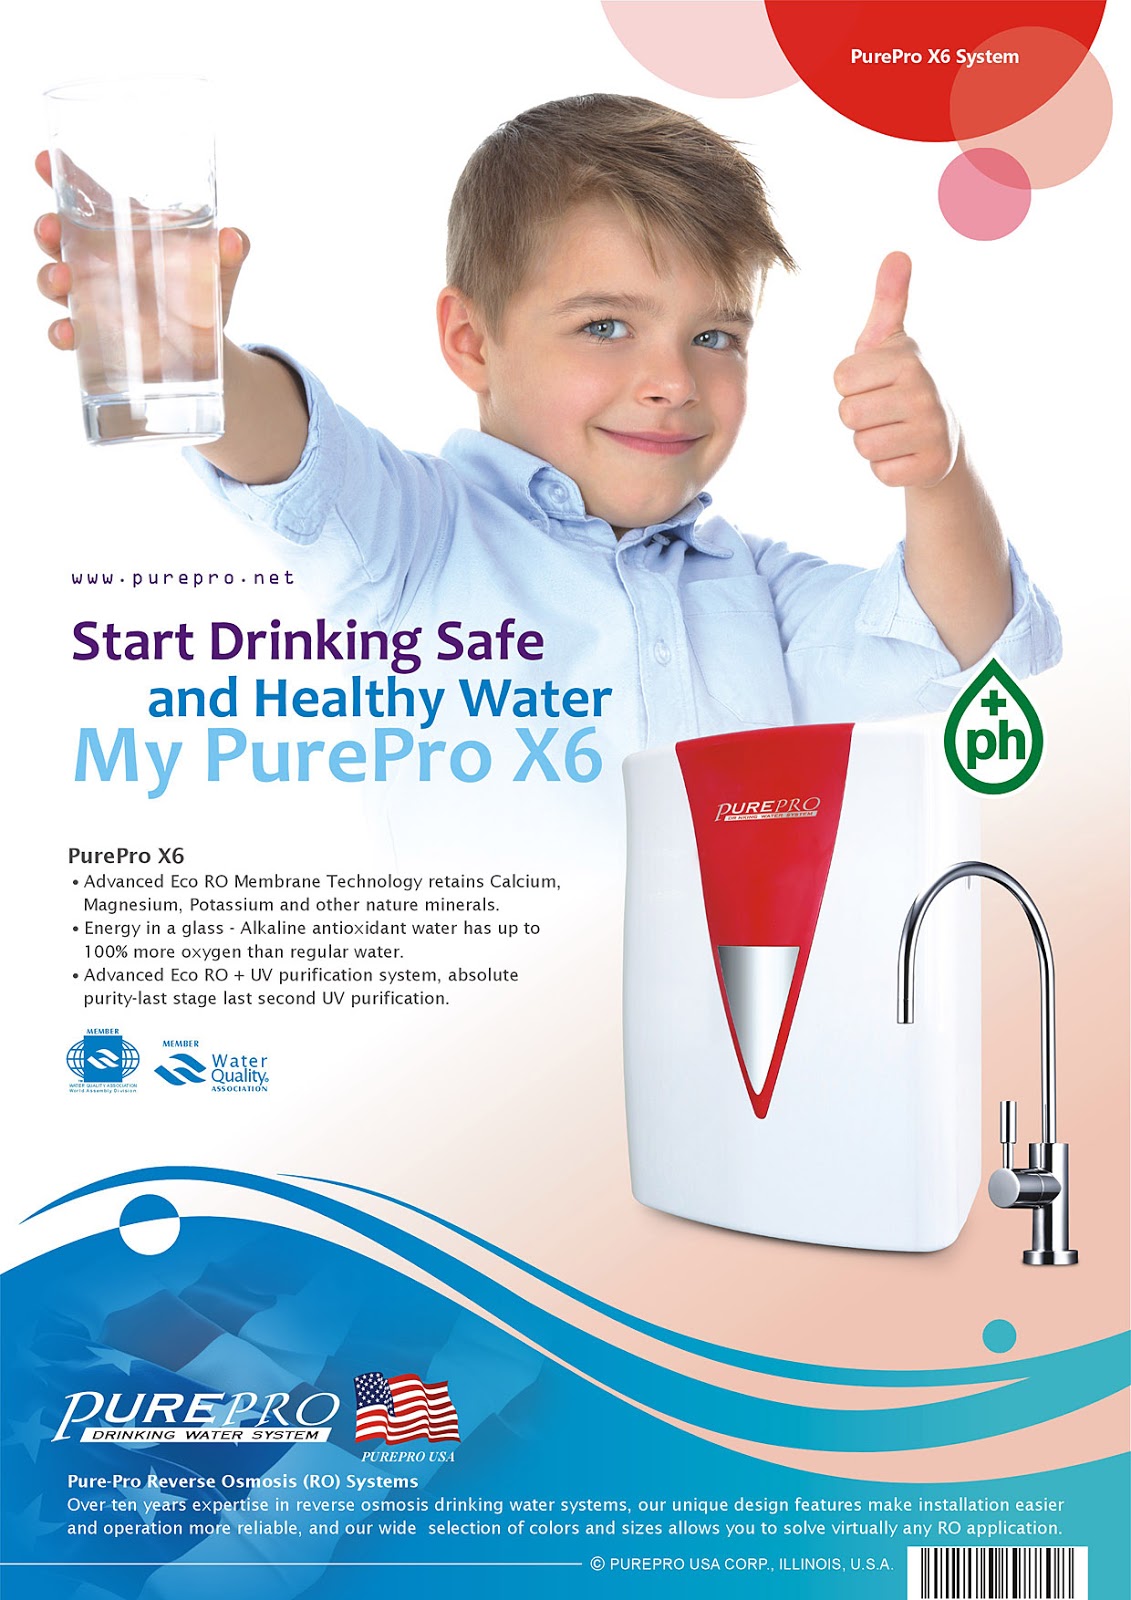 PurePro® X6 : My Pure Water, My PurePro X6, Alkaline Ultraviolet Reverse Osmosis System